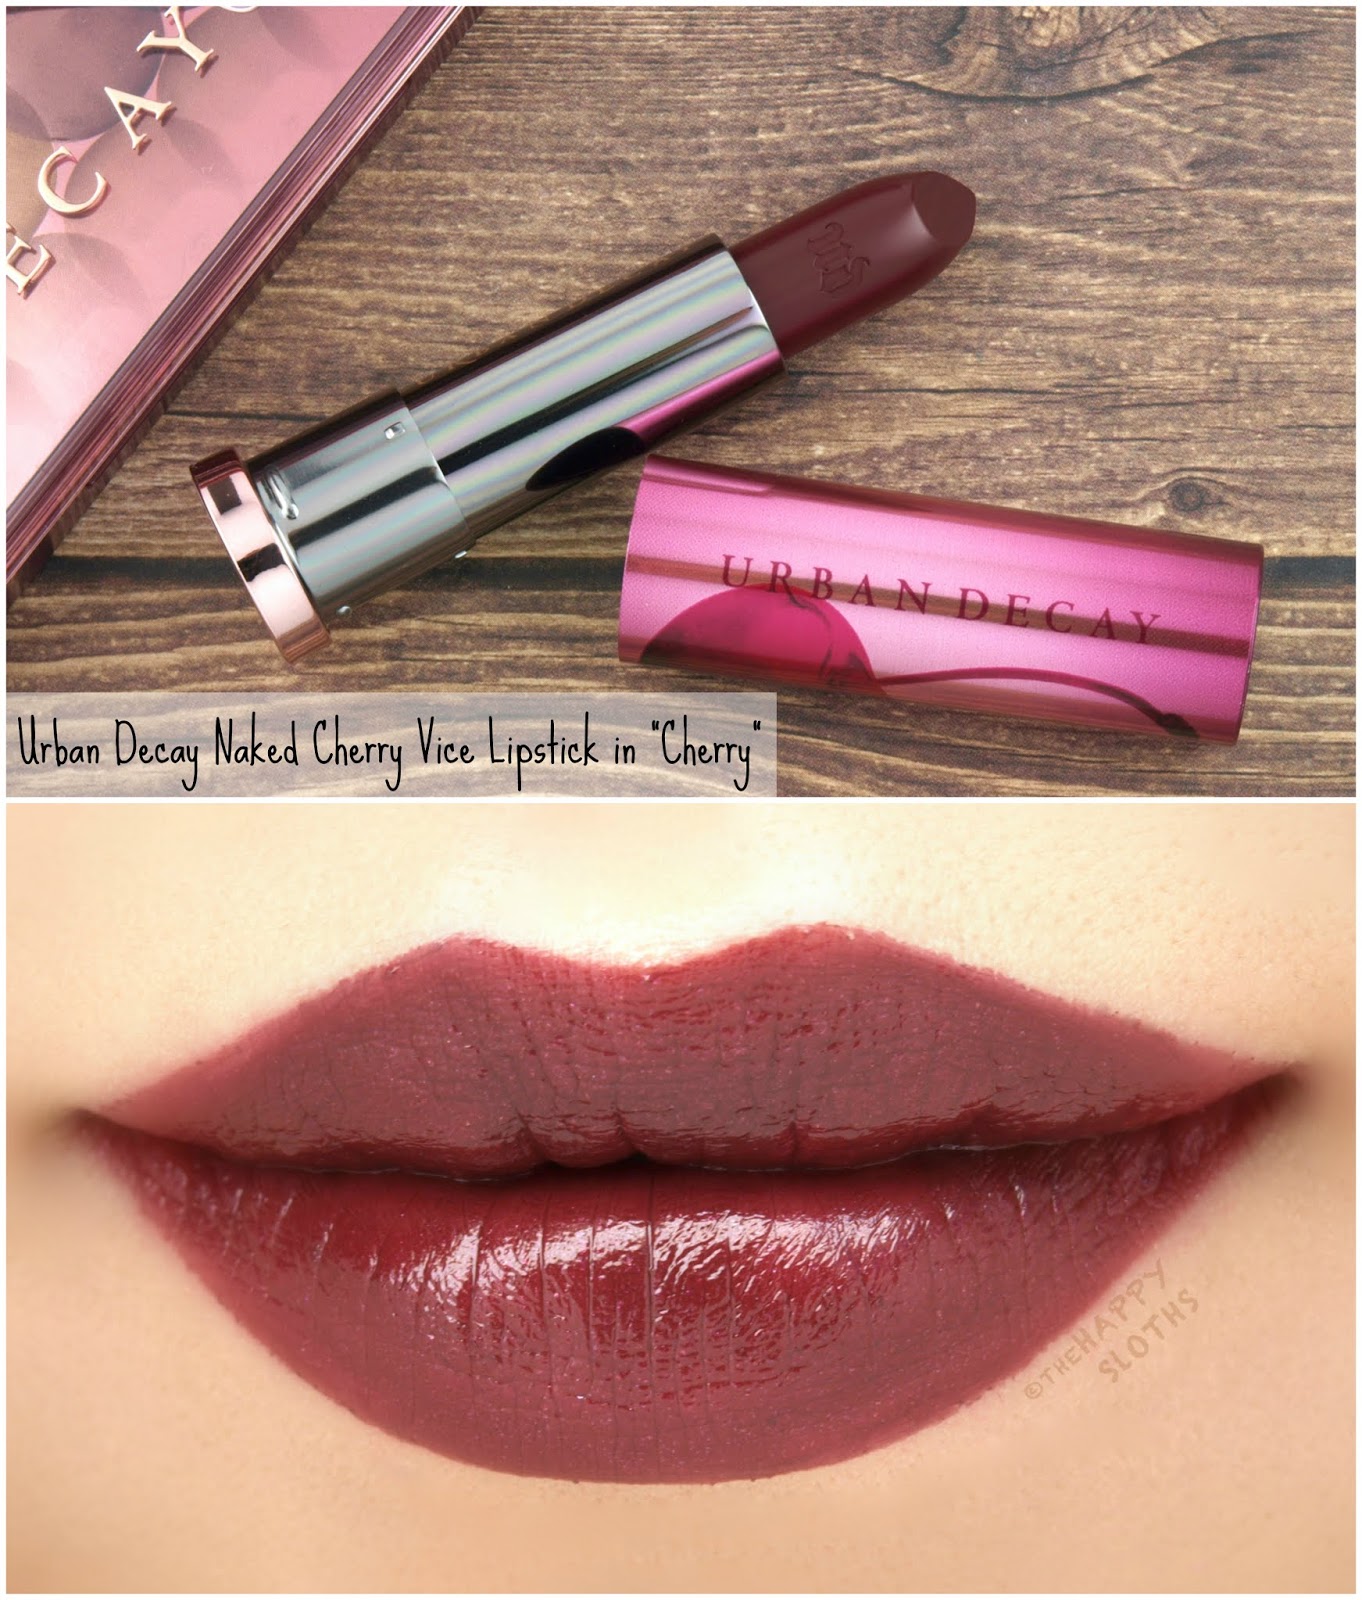 Urban Decay | Naked Cherry Vice Lipstick in "Cherry": Review and Swatches